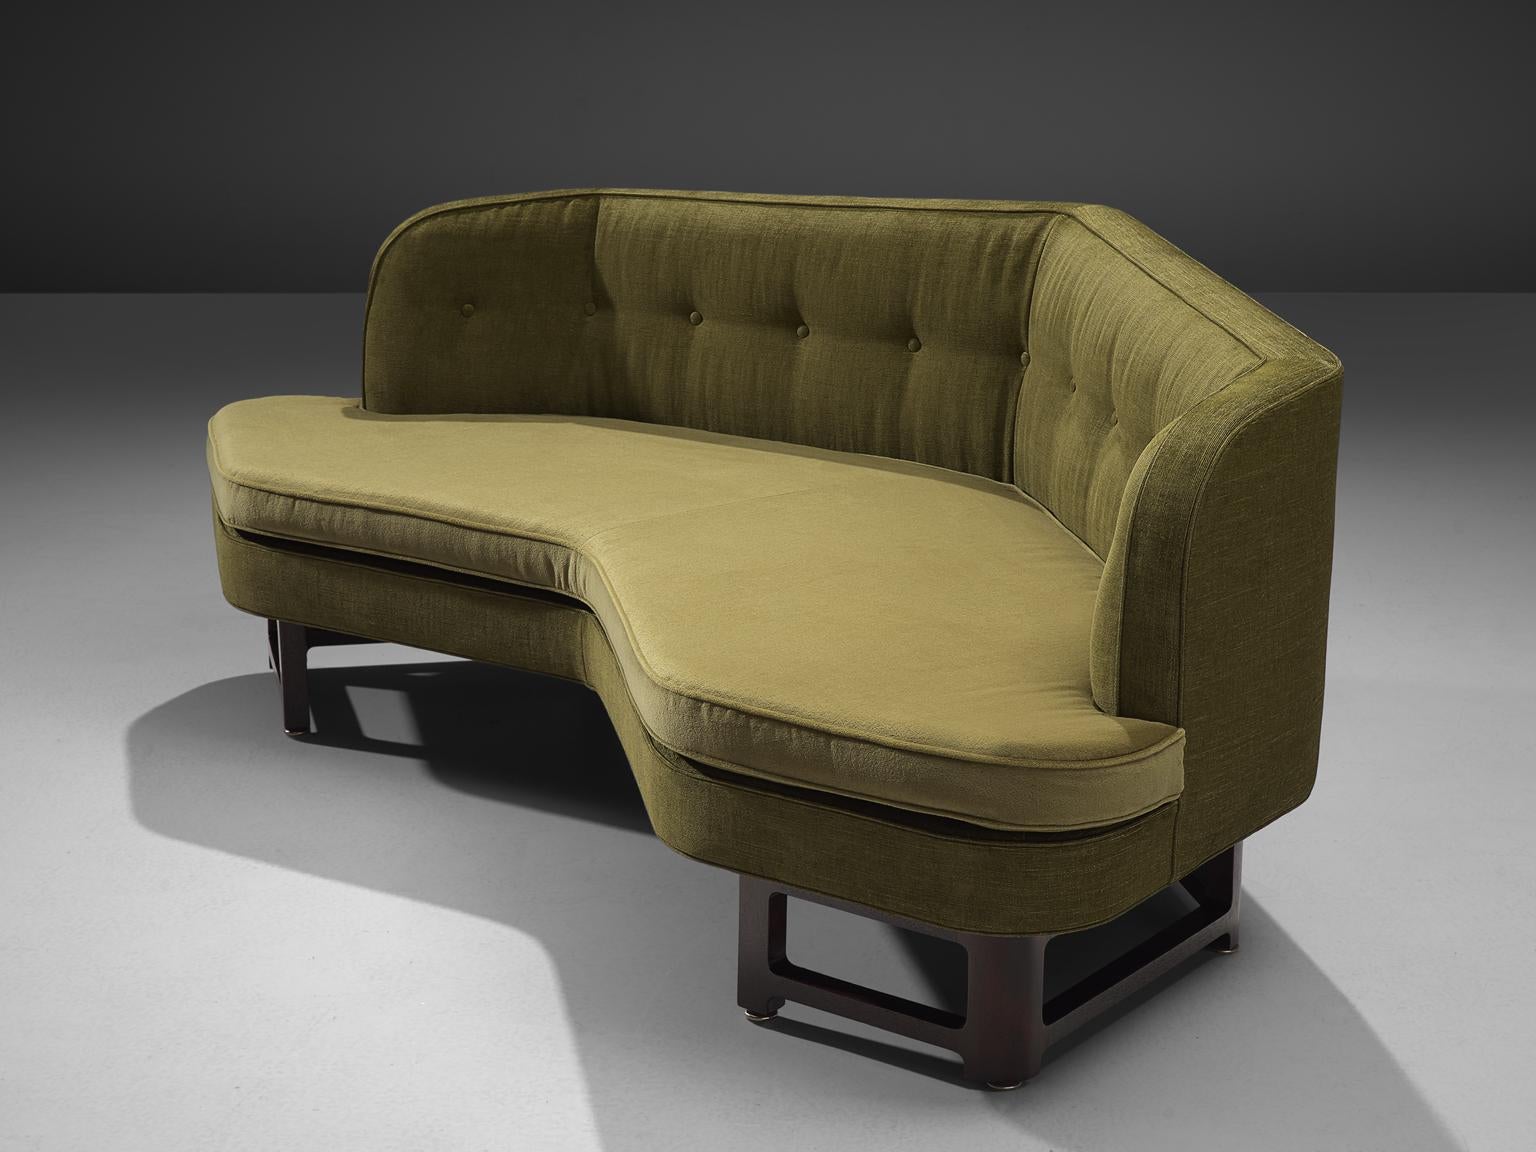 Edward Wormley for Dunbar, Janus sofa model 6392A, reupholstered in green fabric, mahogany, United States, 1960s.

Wide angled Janus' sofa by Edward Wormely. This sofa has a modern shape and sinuous lines which create a comfortable and appealing